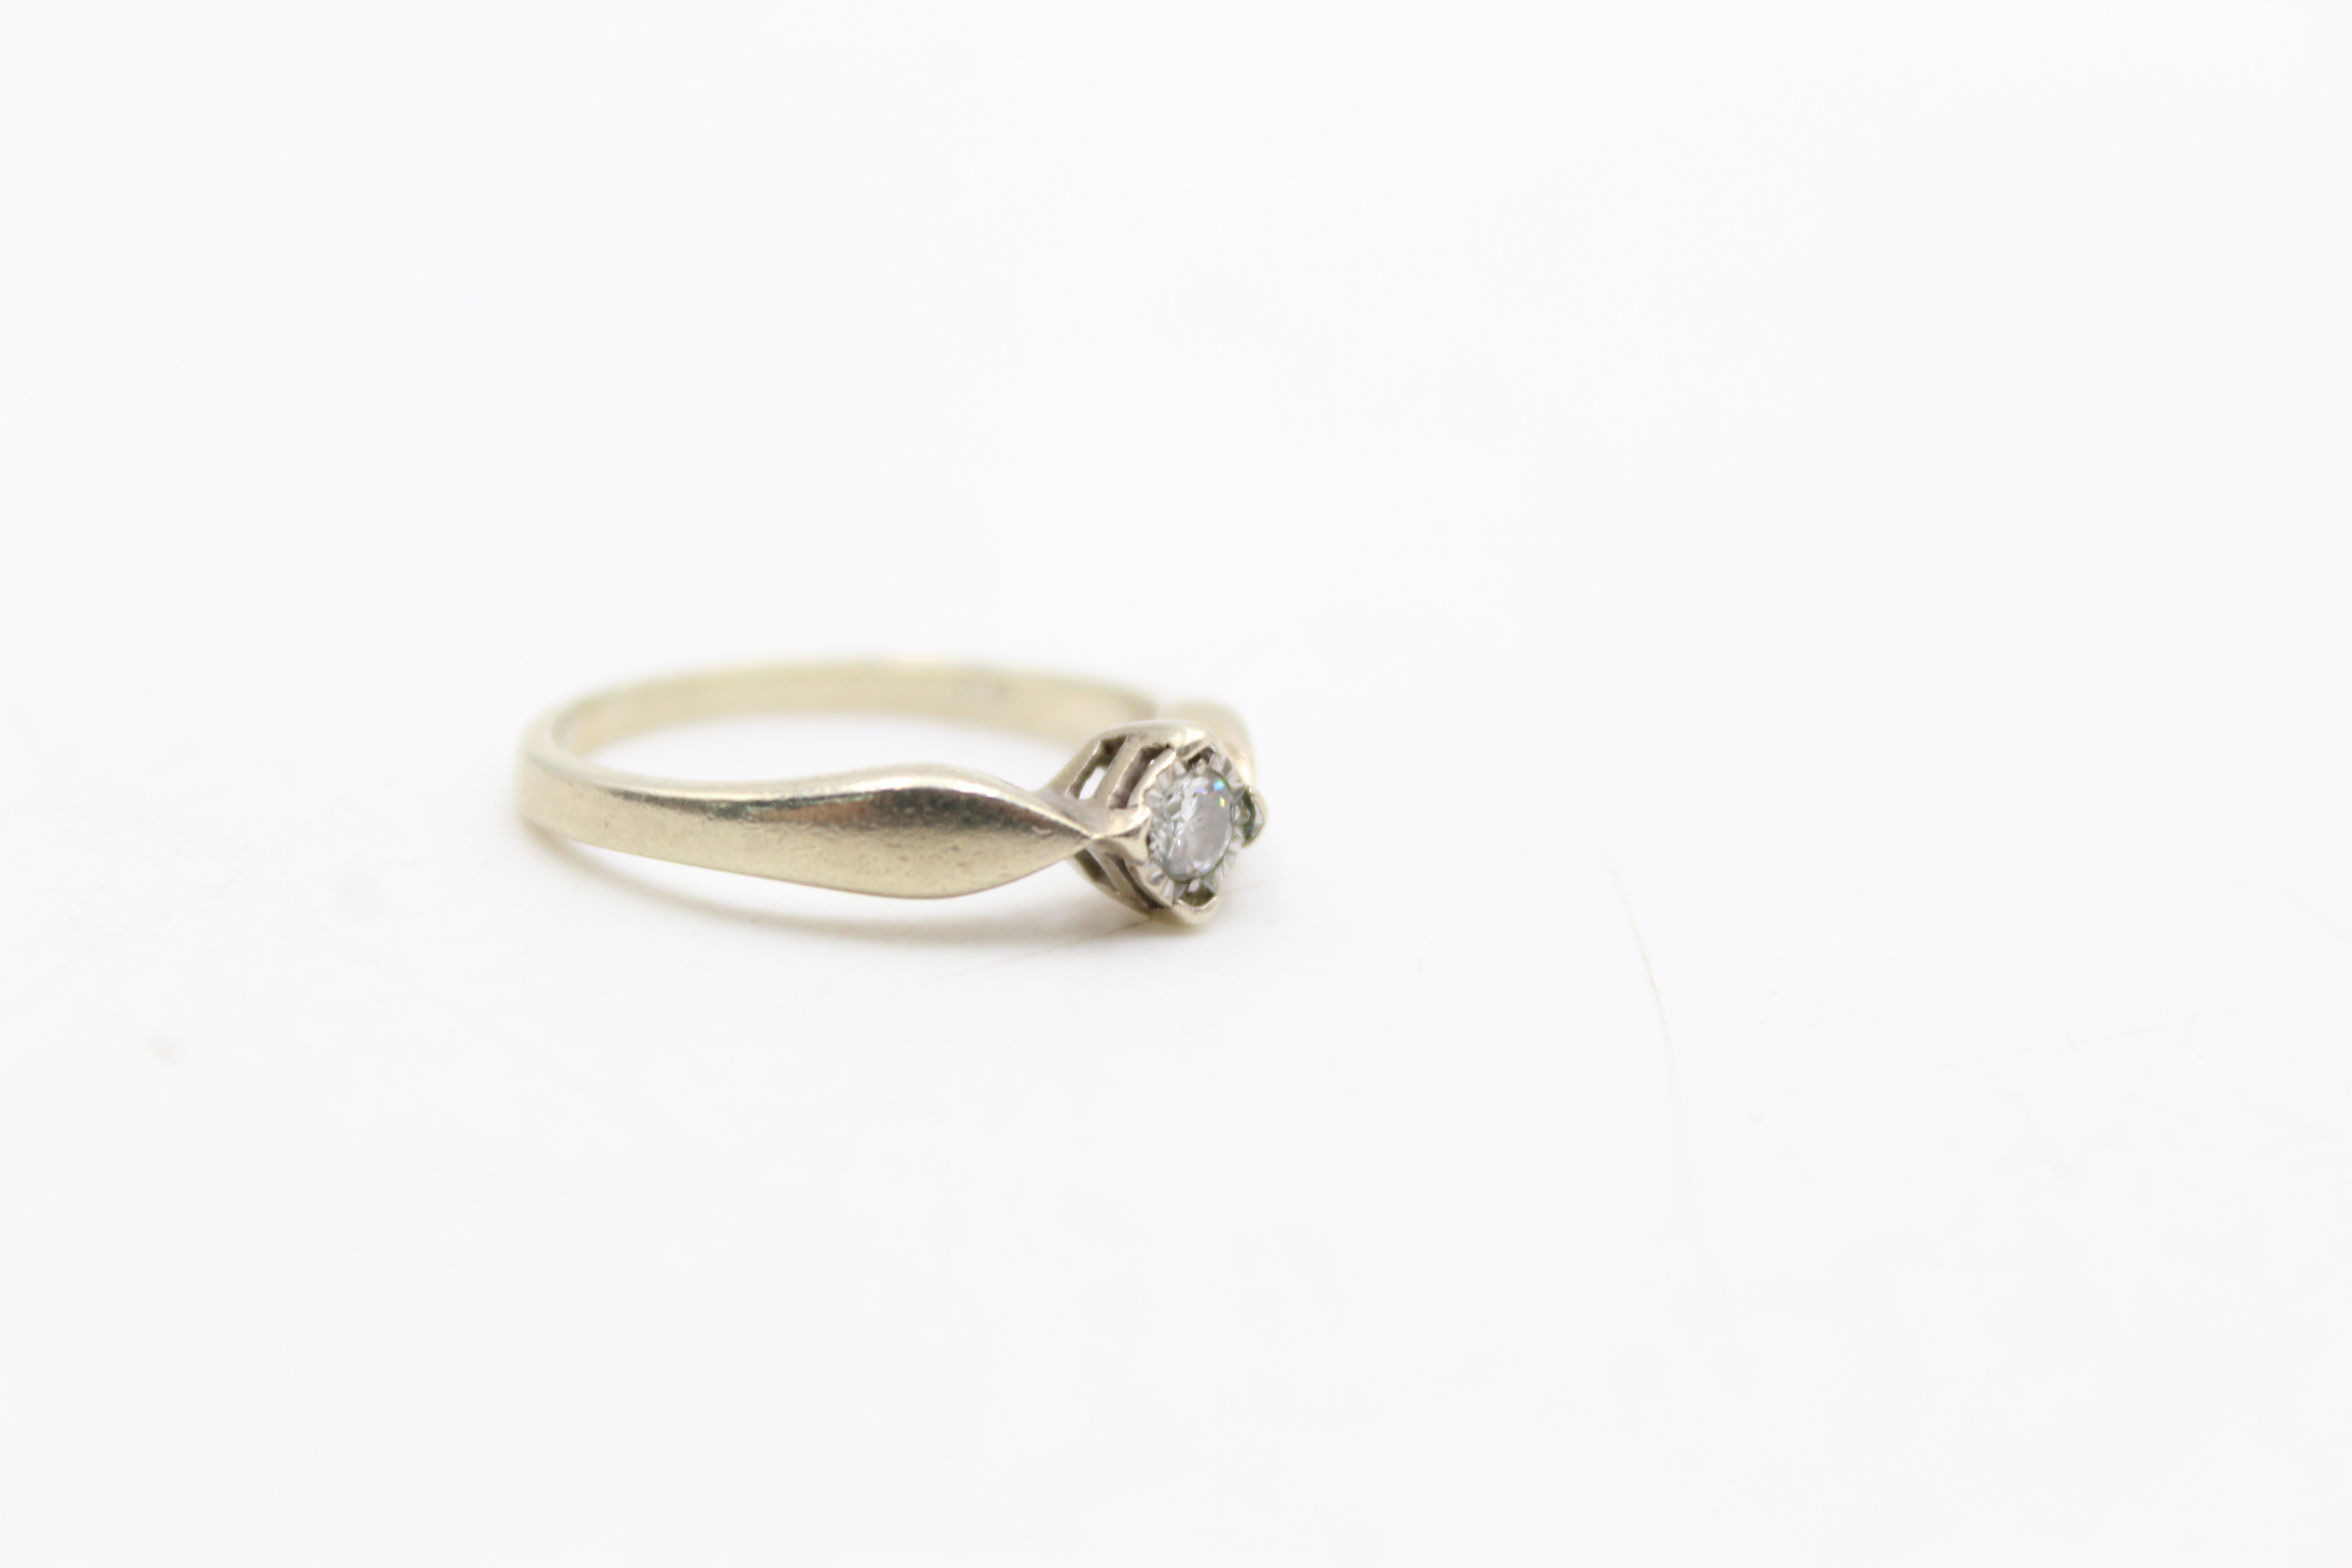 9ct gold diamond solitaire ring (2.7g) - Image 3 of 7